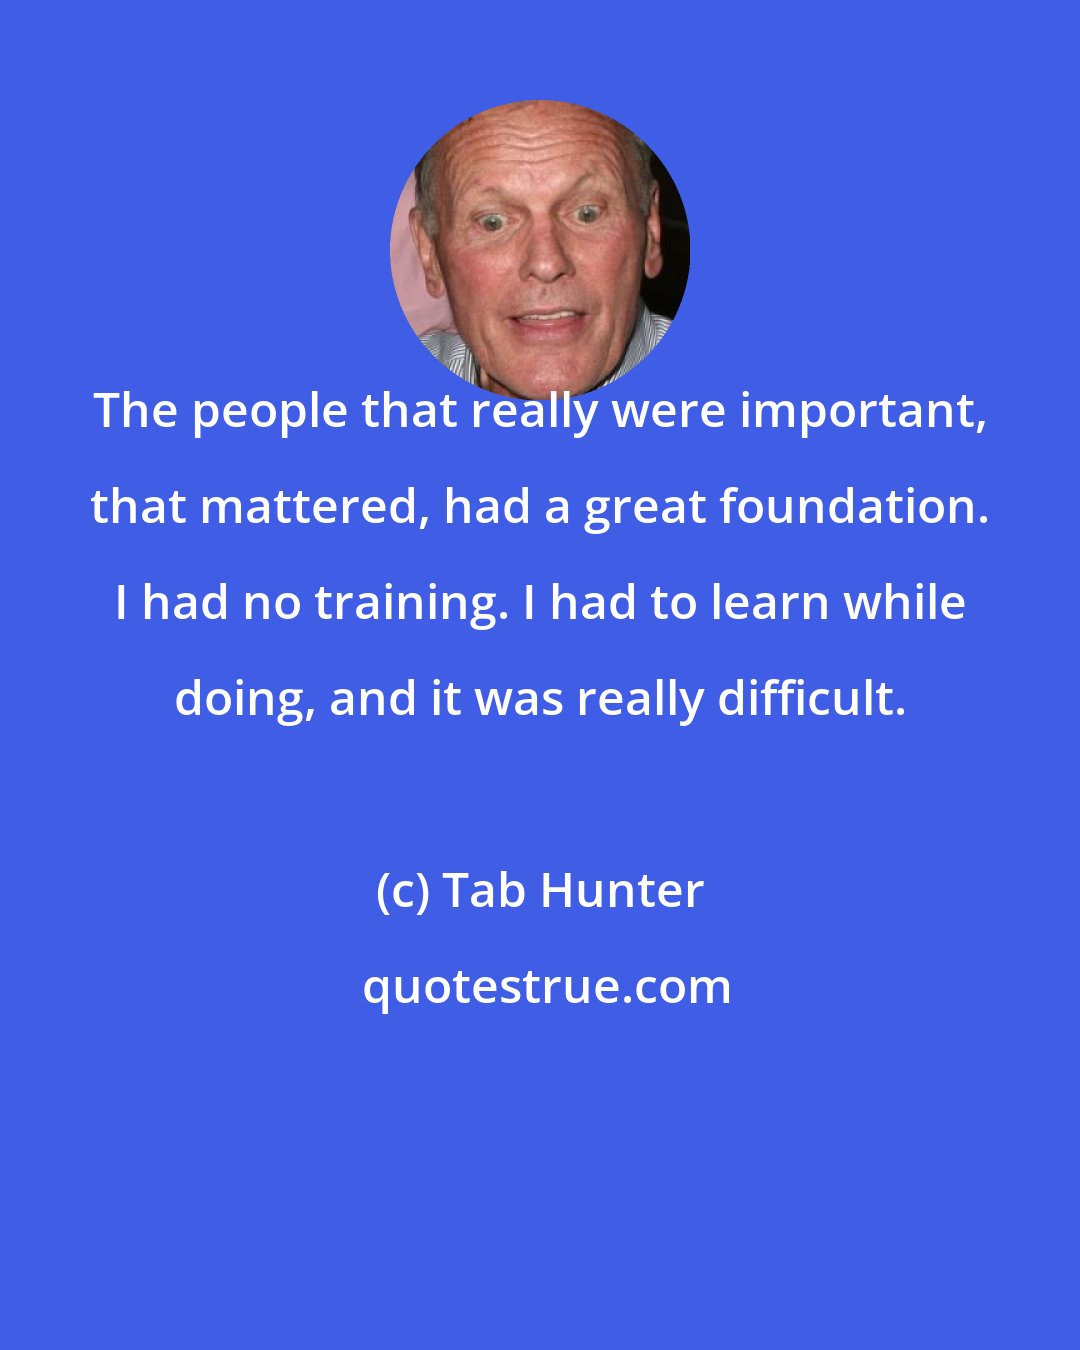 Tab Hunter: The people that really were important, that mattered, had a great foundation. I had no training. I had to learn while doing, and it was really difficult.